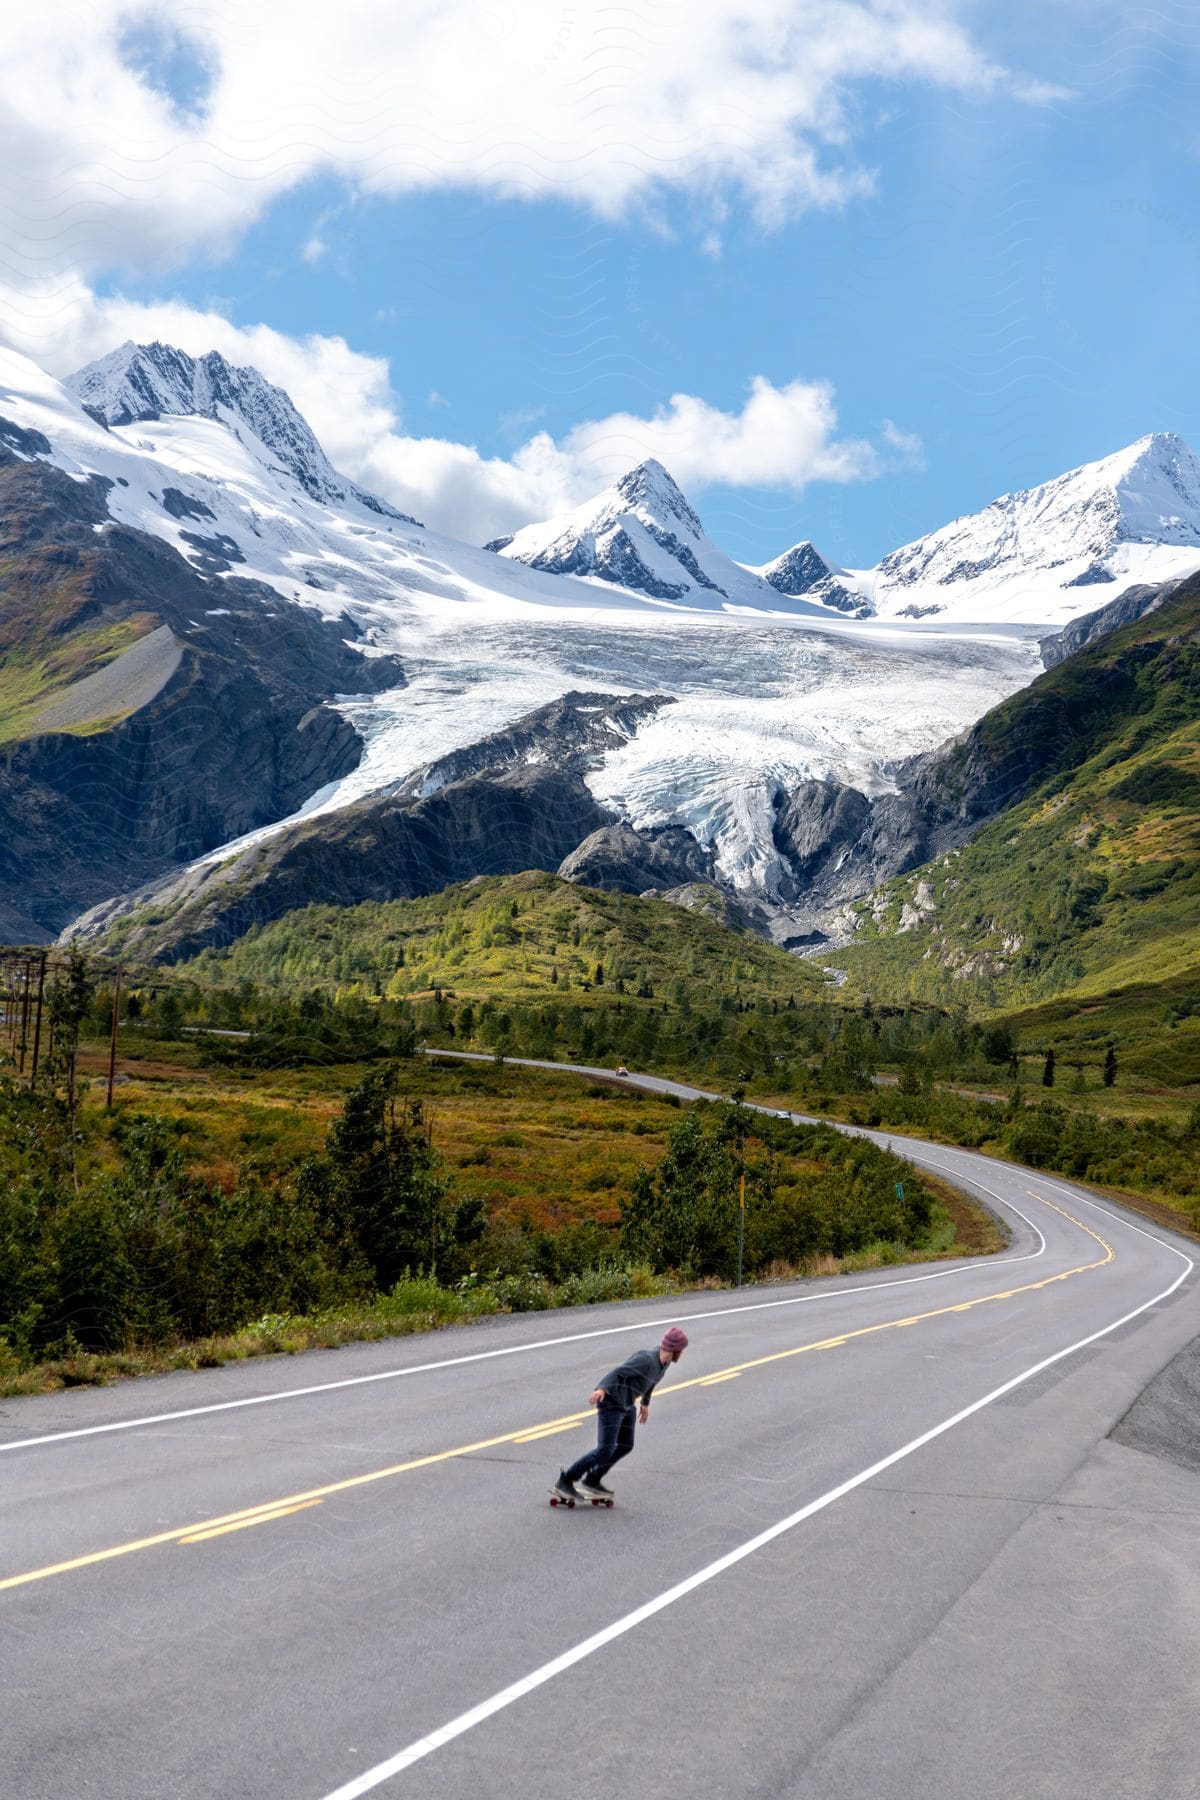 A person skateboarding on an asphalt street in a rural region with huge mountains covered in ice